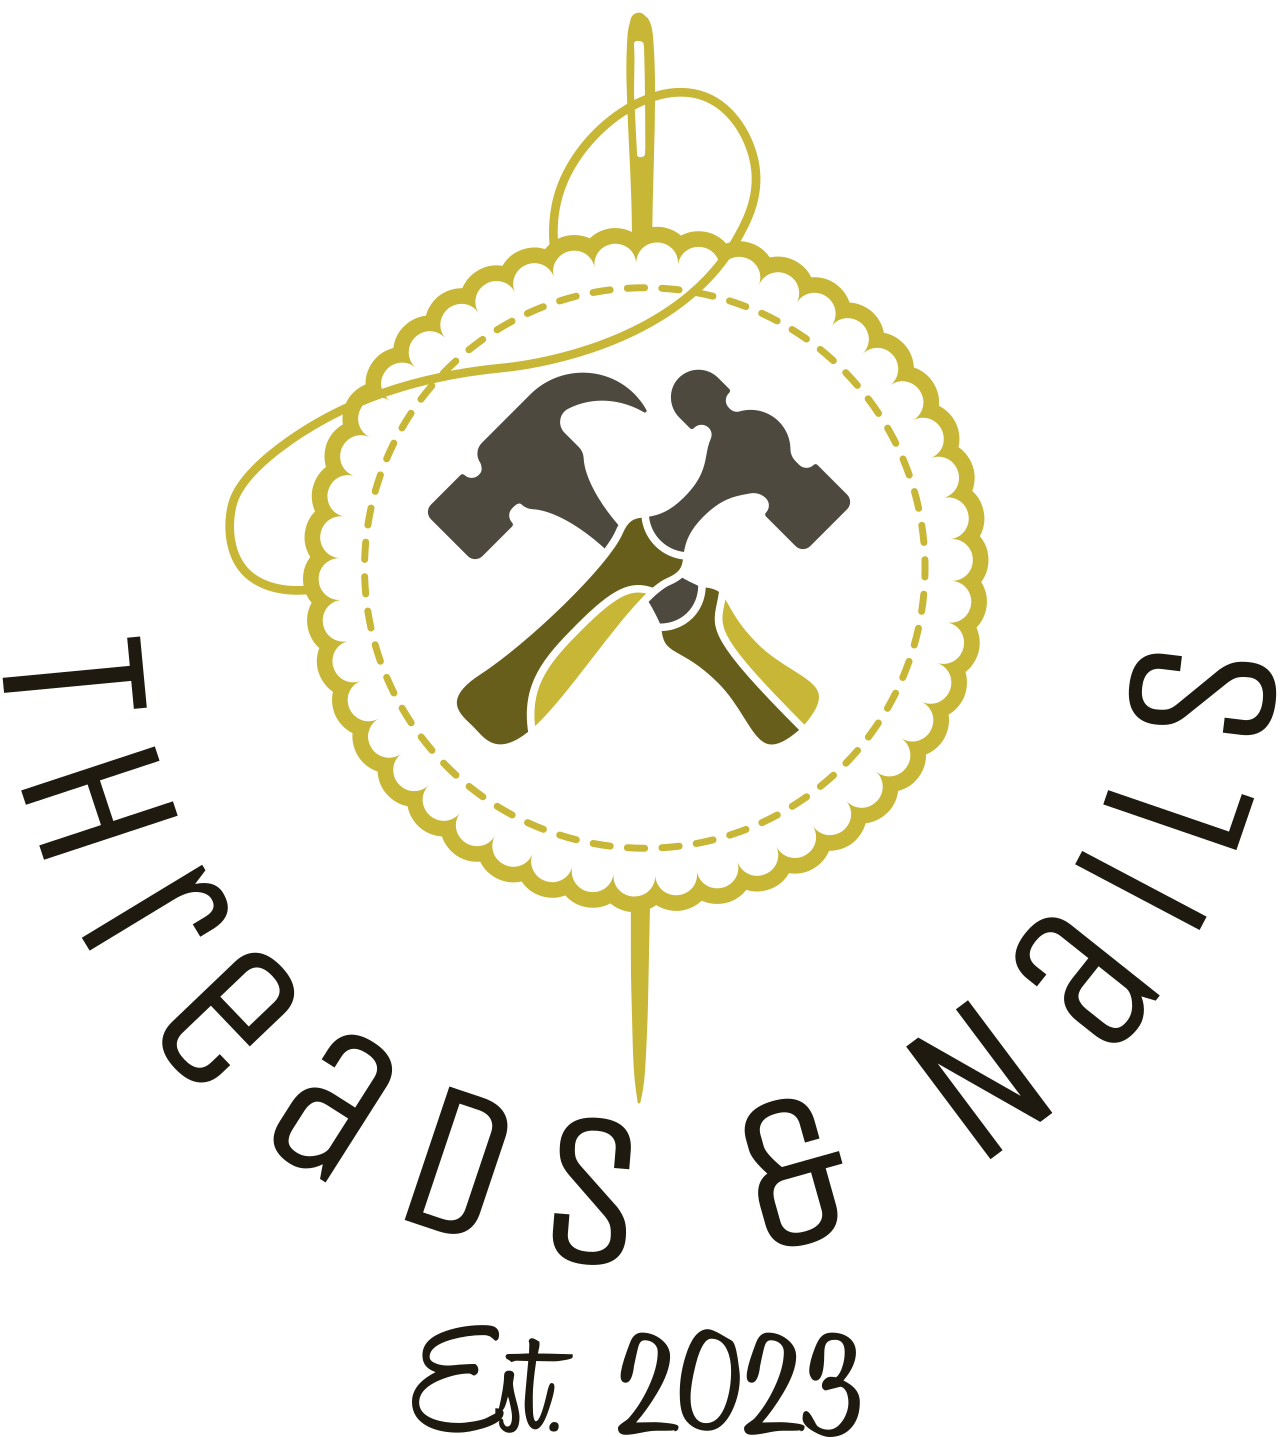 Threads & Nails's web page